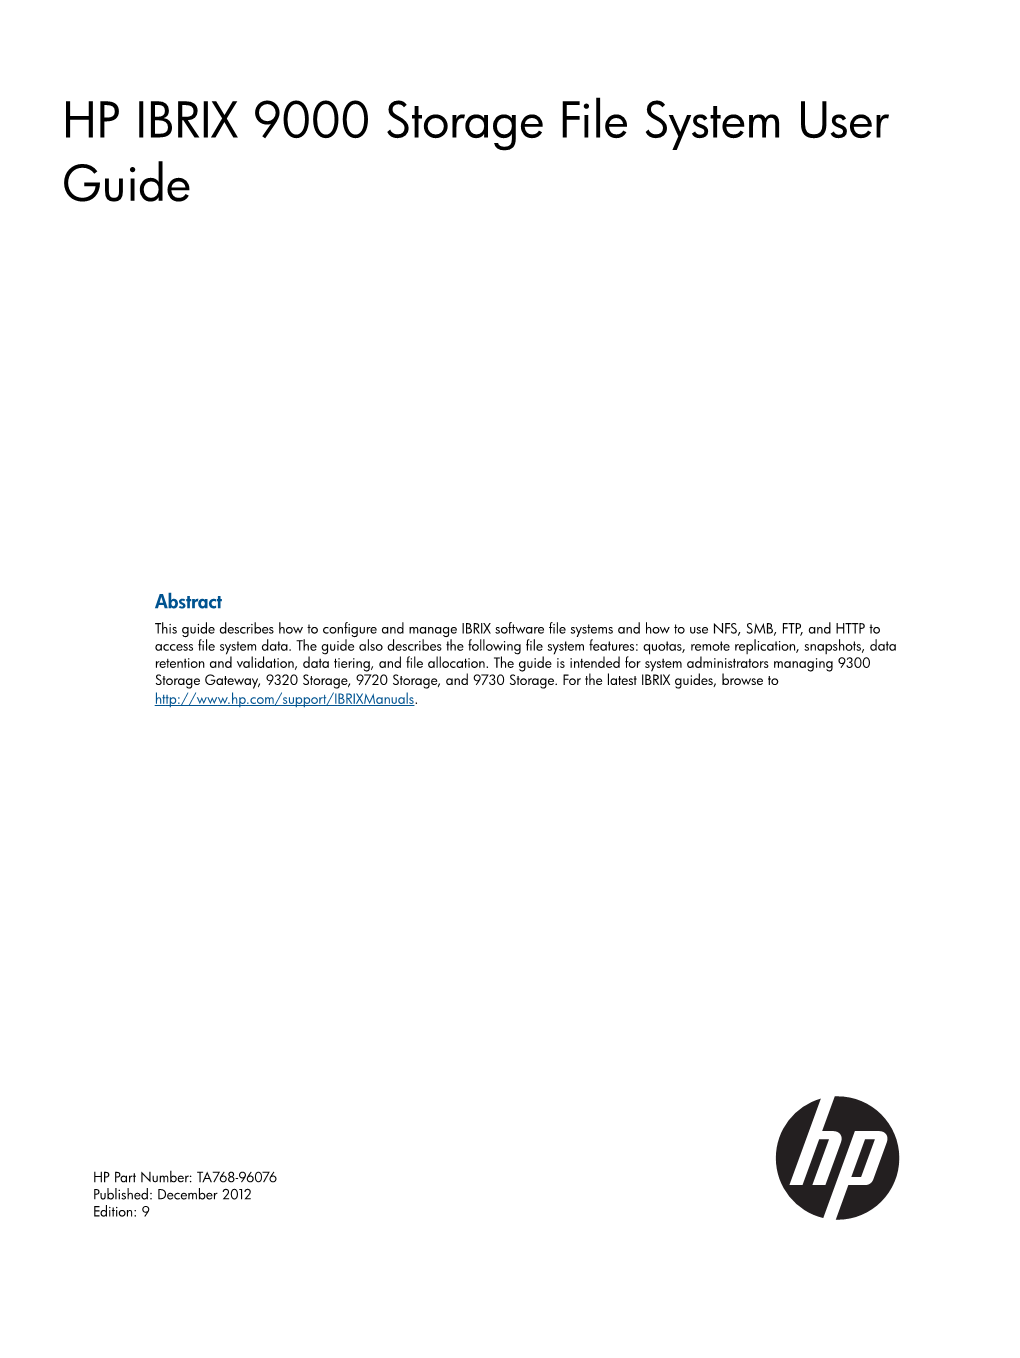 HP IBRIX 9000 Storage File System User Guide